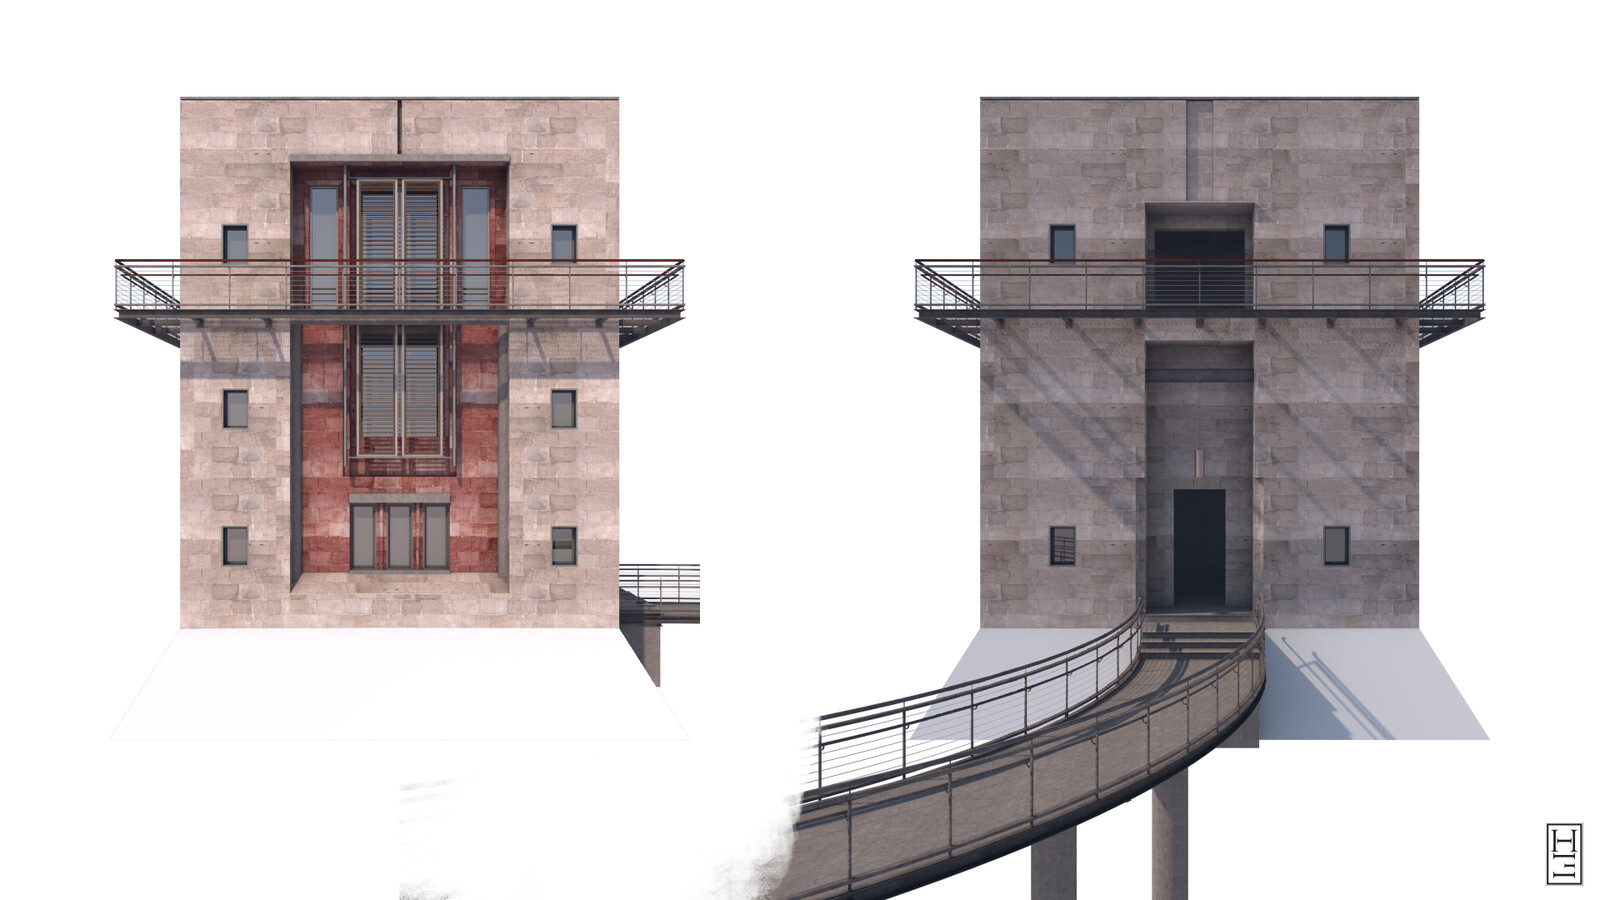 Raw Images out of ArchiCAD and CineRender